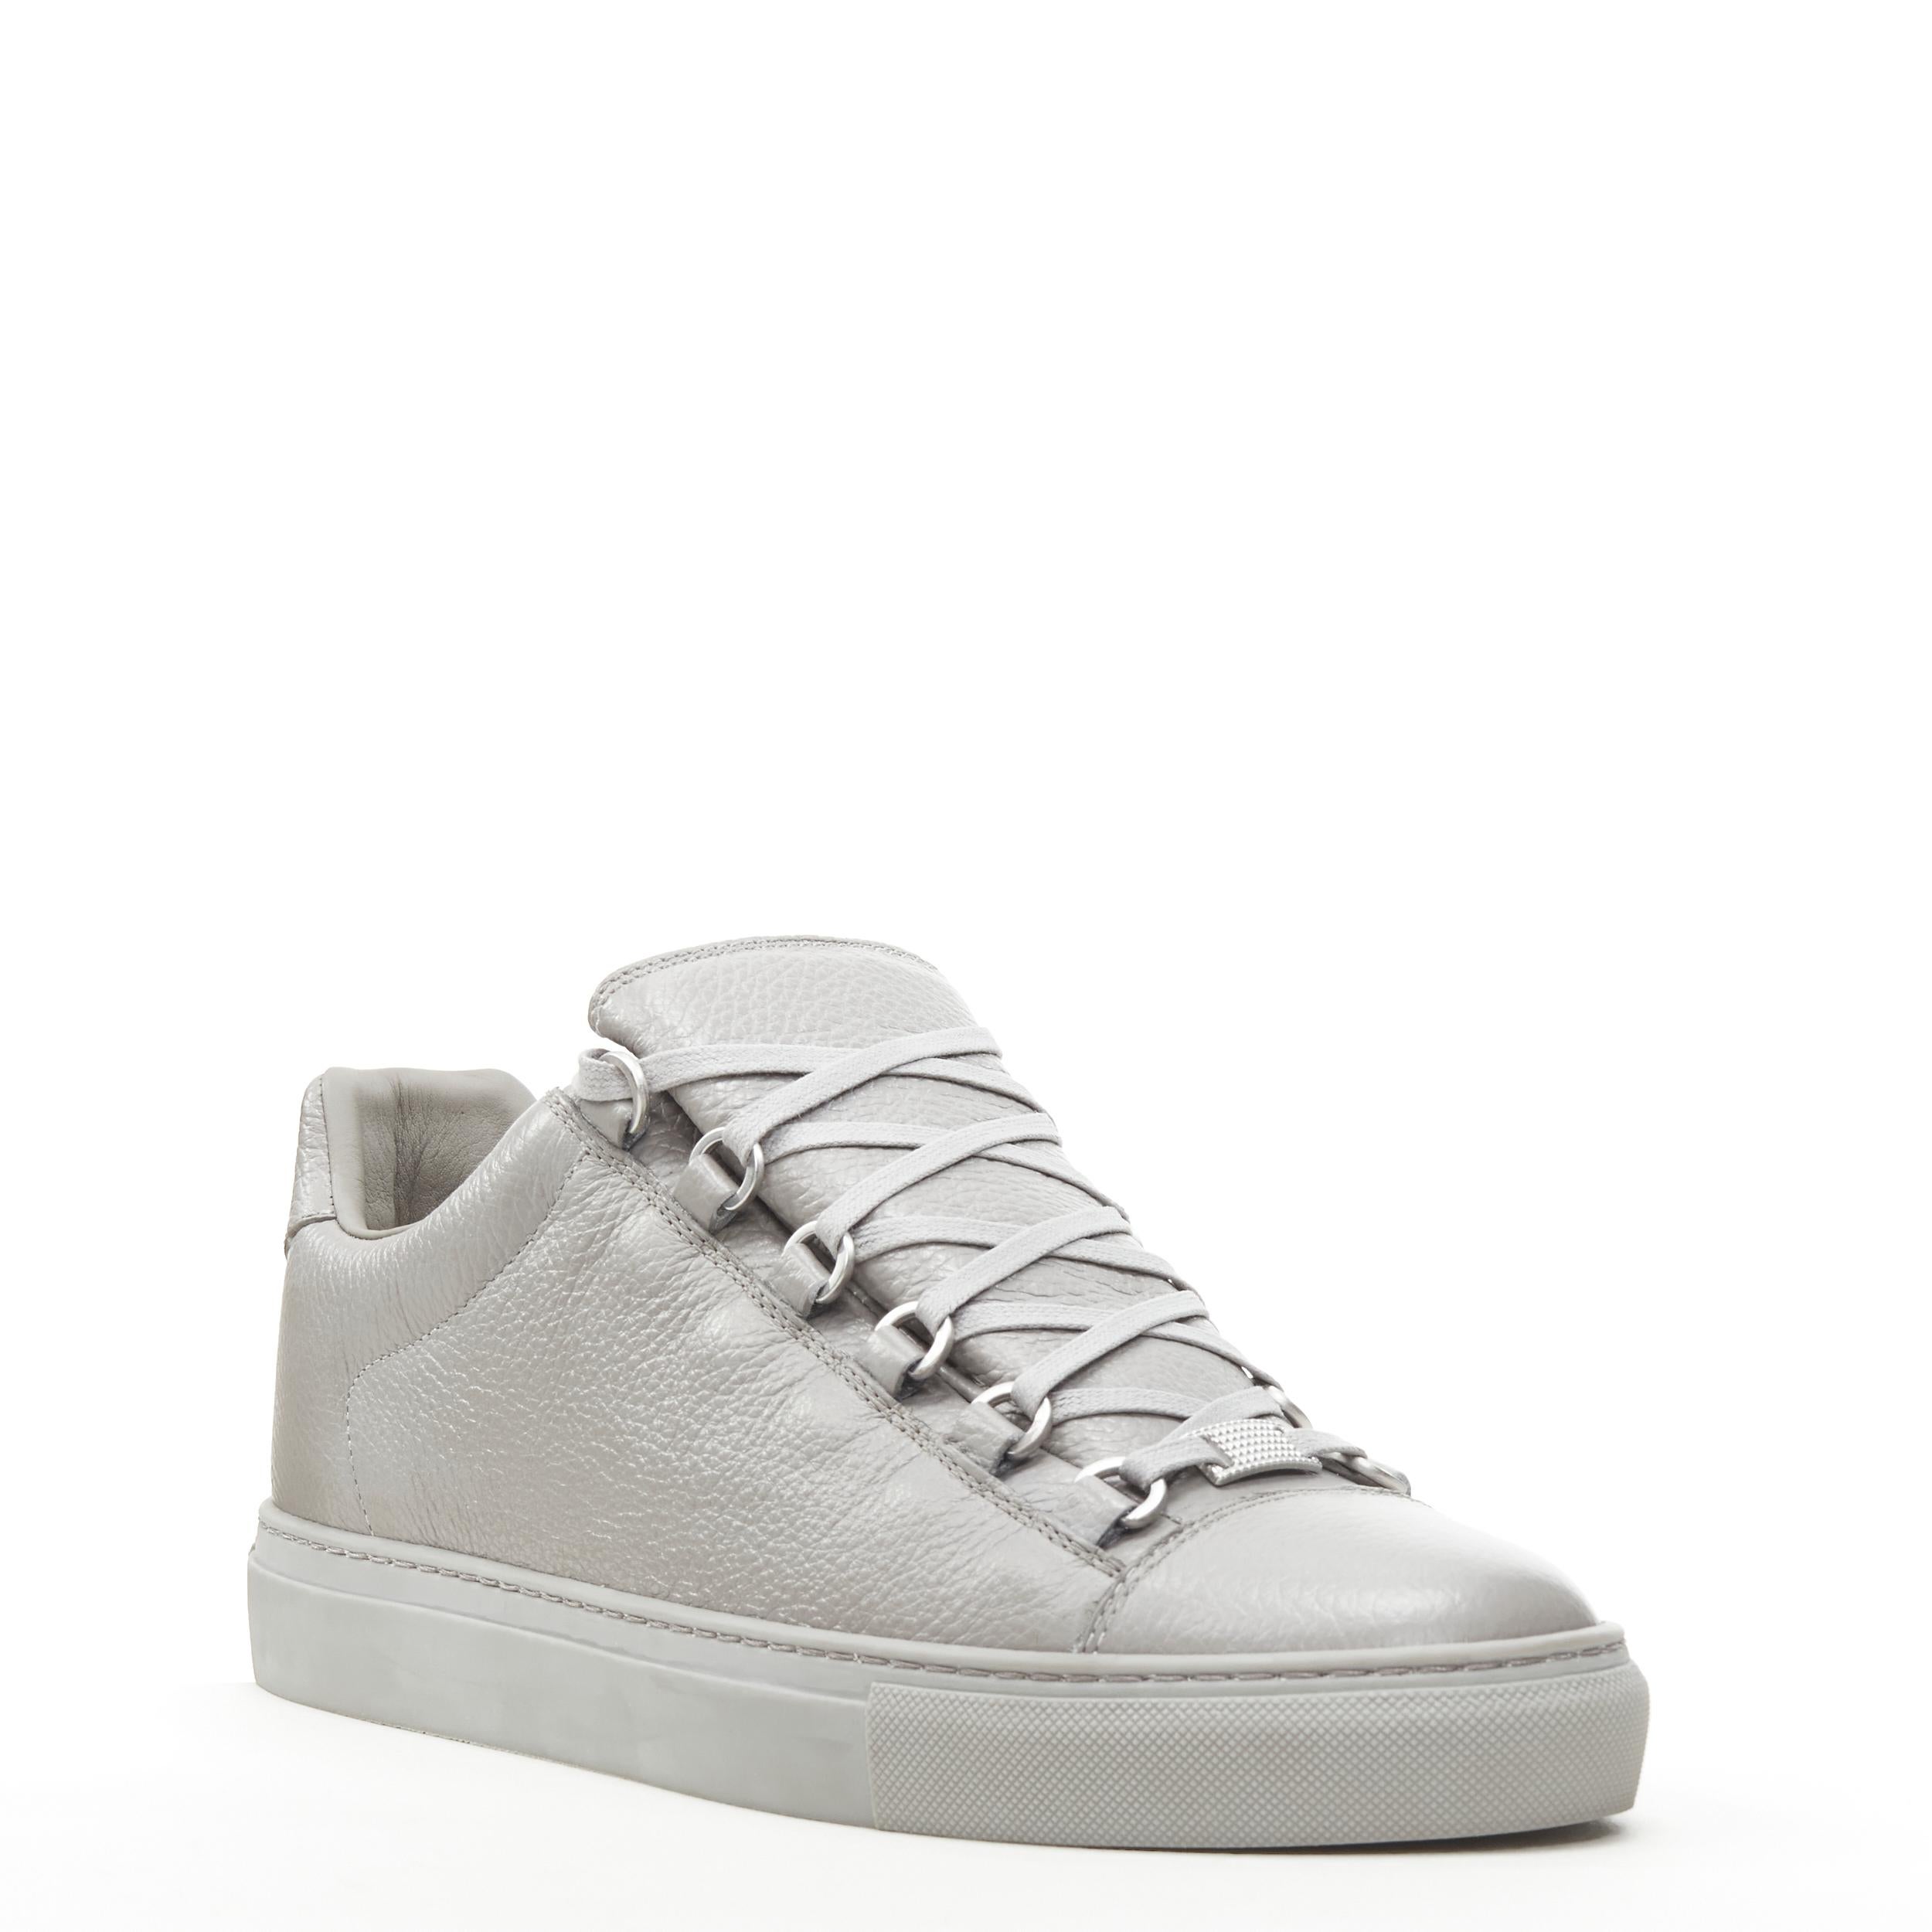 new BALENCIAGA DEMNA Arena Pyrite Grey grained leather low top sneakers EU41 US8 
Reference: TGAS/C00423 
Brand: Balenciaga 
Designer: Demna 
Model: 565558 WA2NO 1230 
Material: Leather 
Color: Grey 
Pattern: Solid 
Closure: Lace 
Extra Detail: Grey